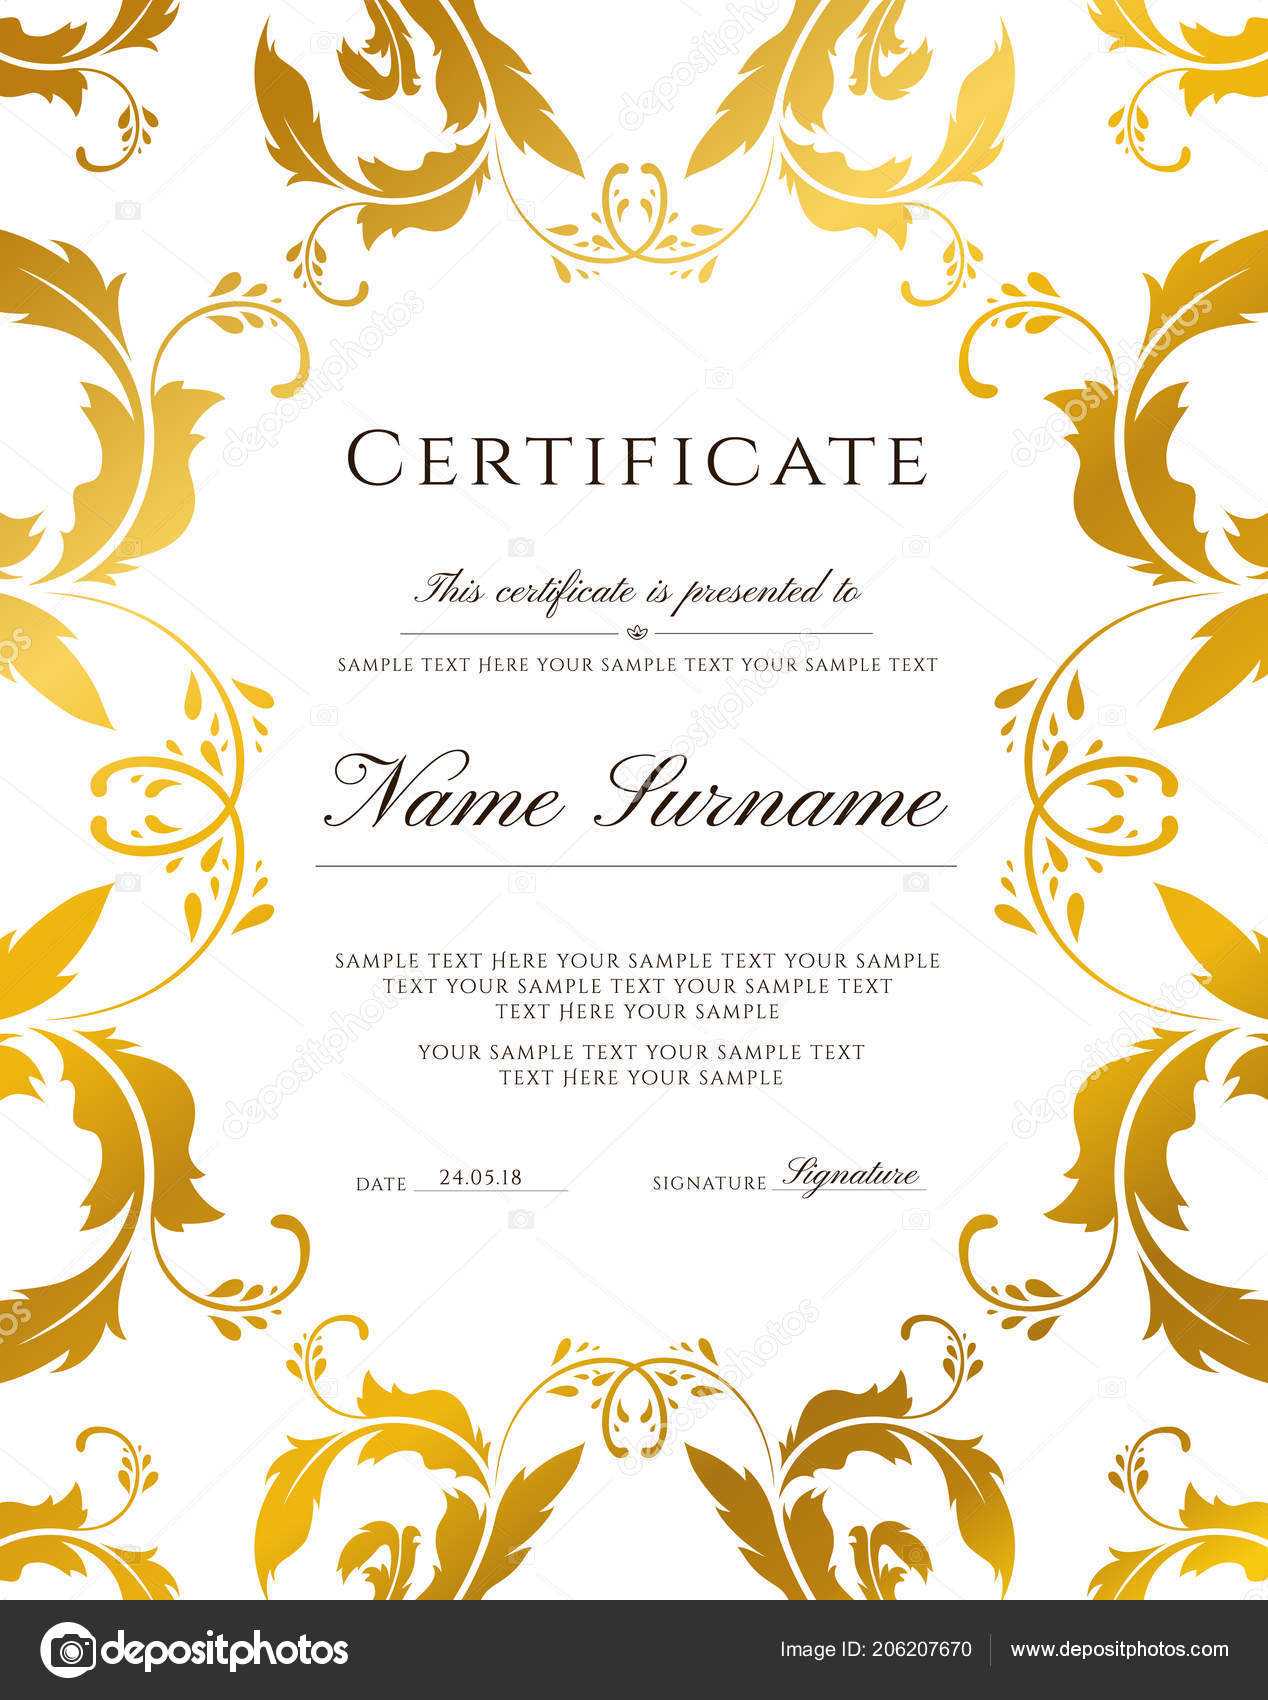 Gold Border Template | Certificate Template Gold Border Regarding Award Certificate Border Template